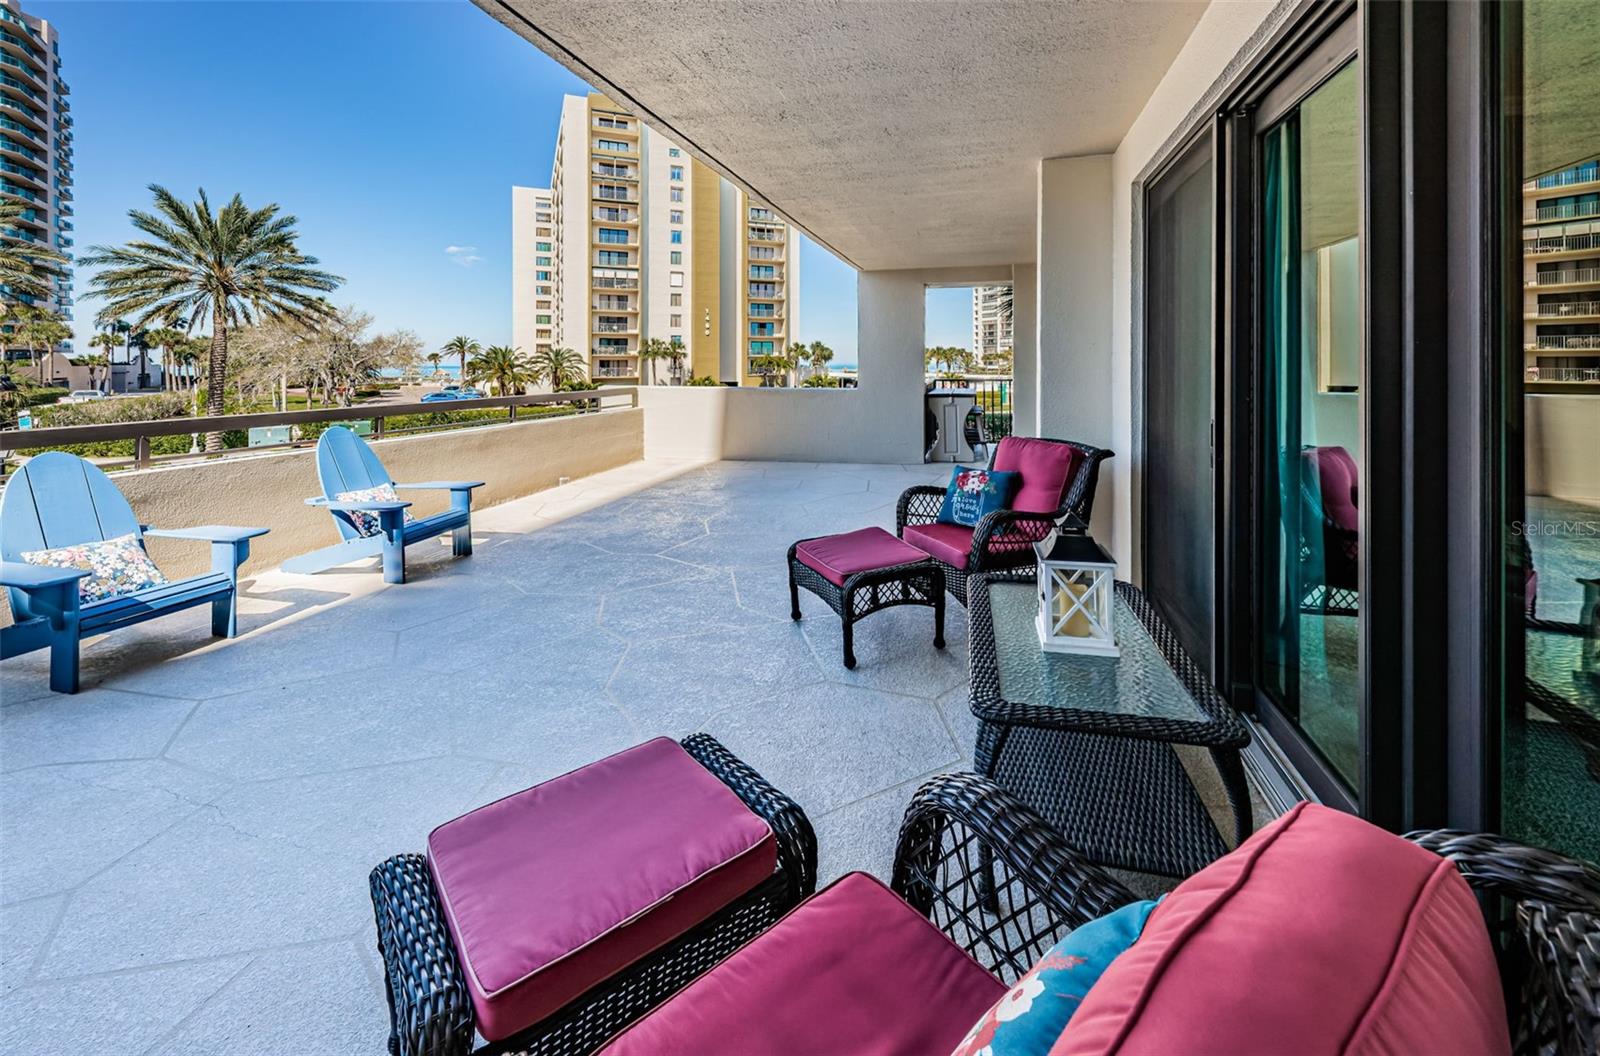 Corner Residence Features Expansive Terrace Ideal for Entertaining.